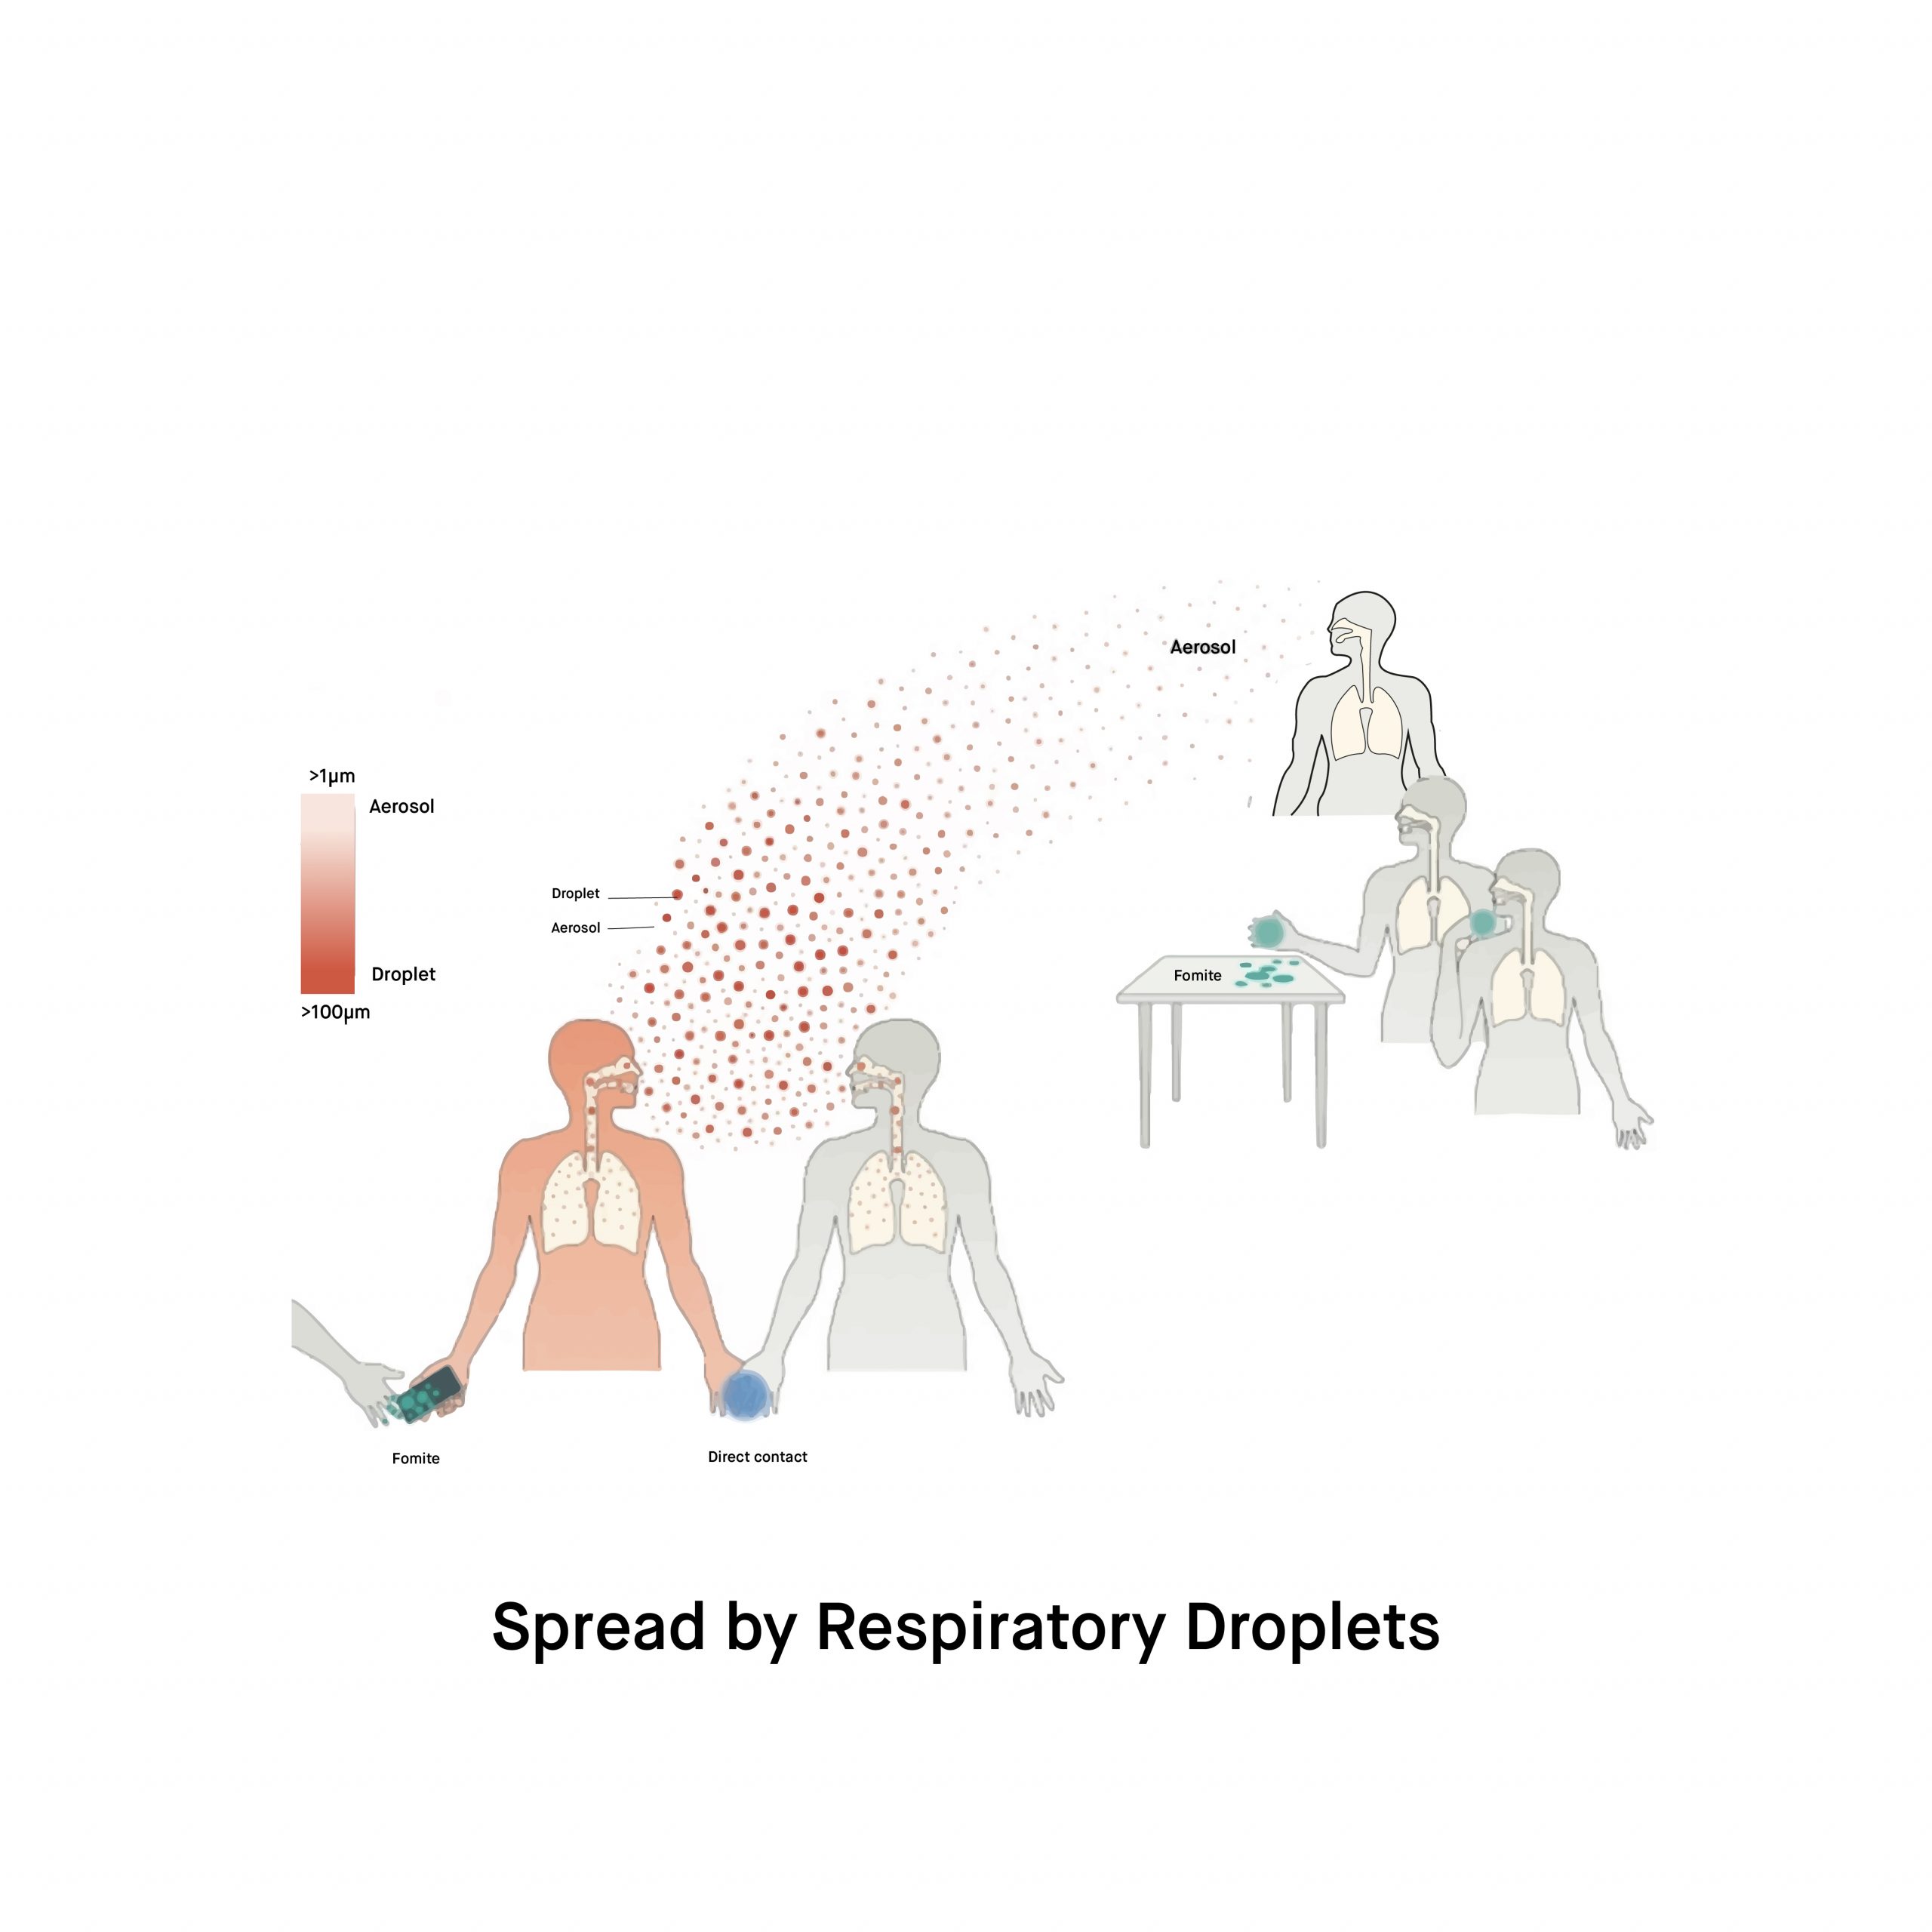 Is it true that monkeypox can be spread by respiratory droplets scaled